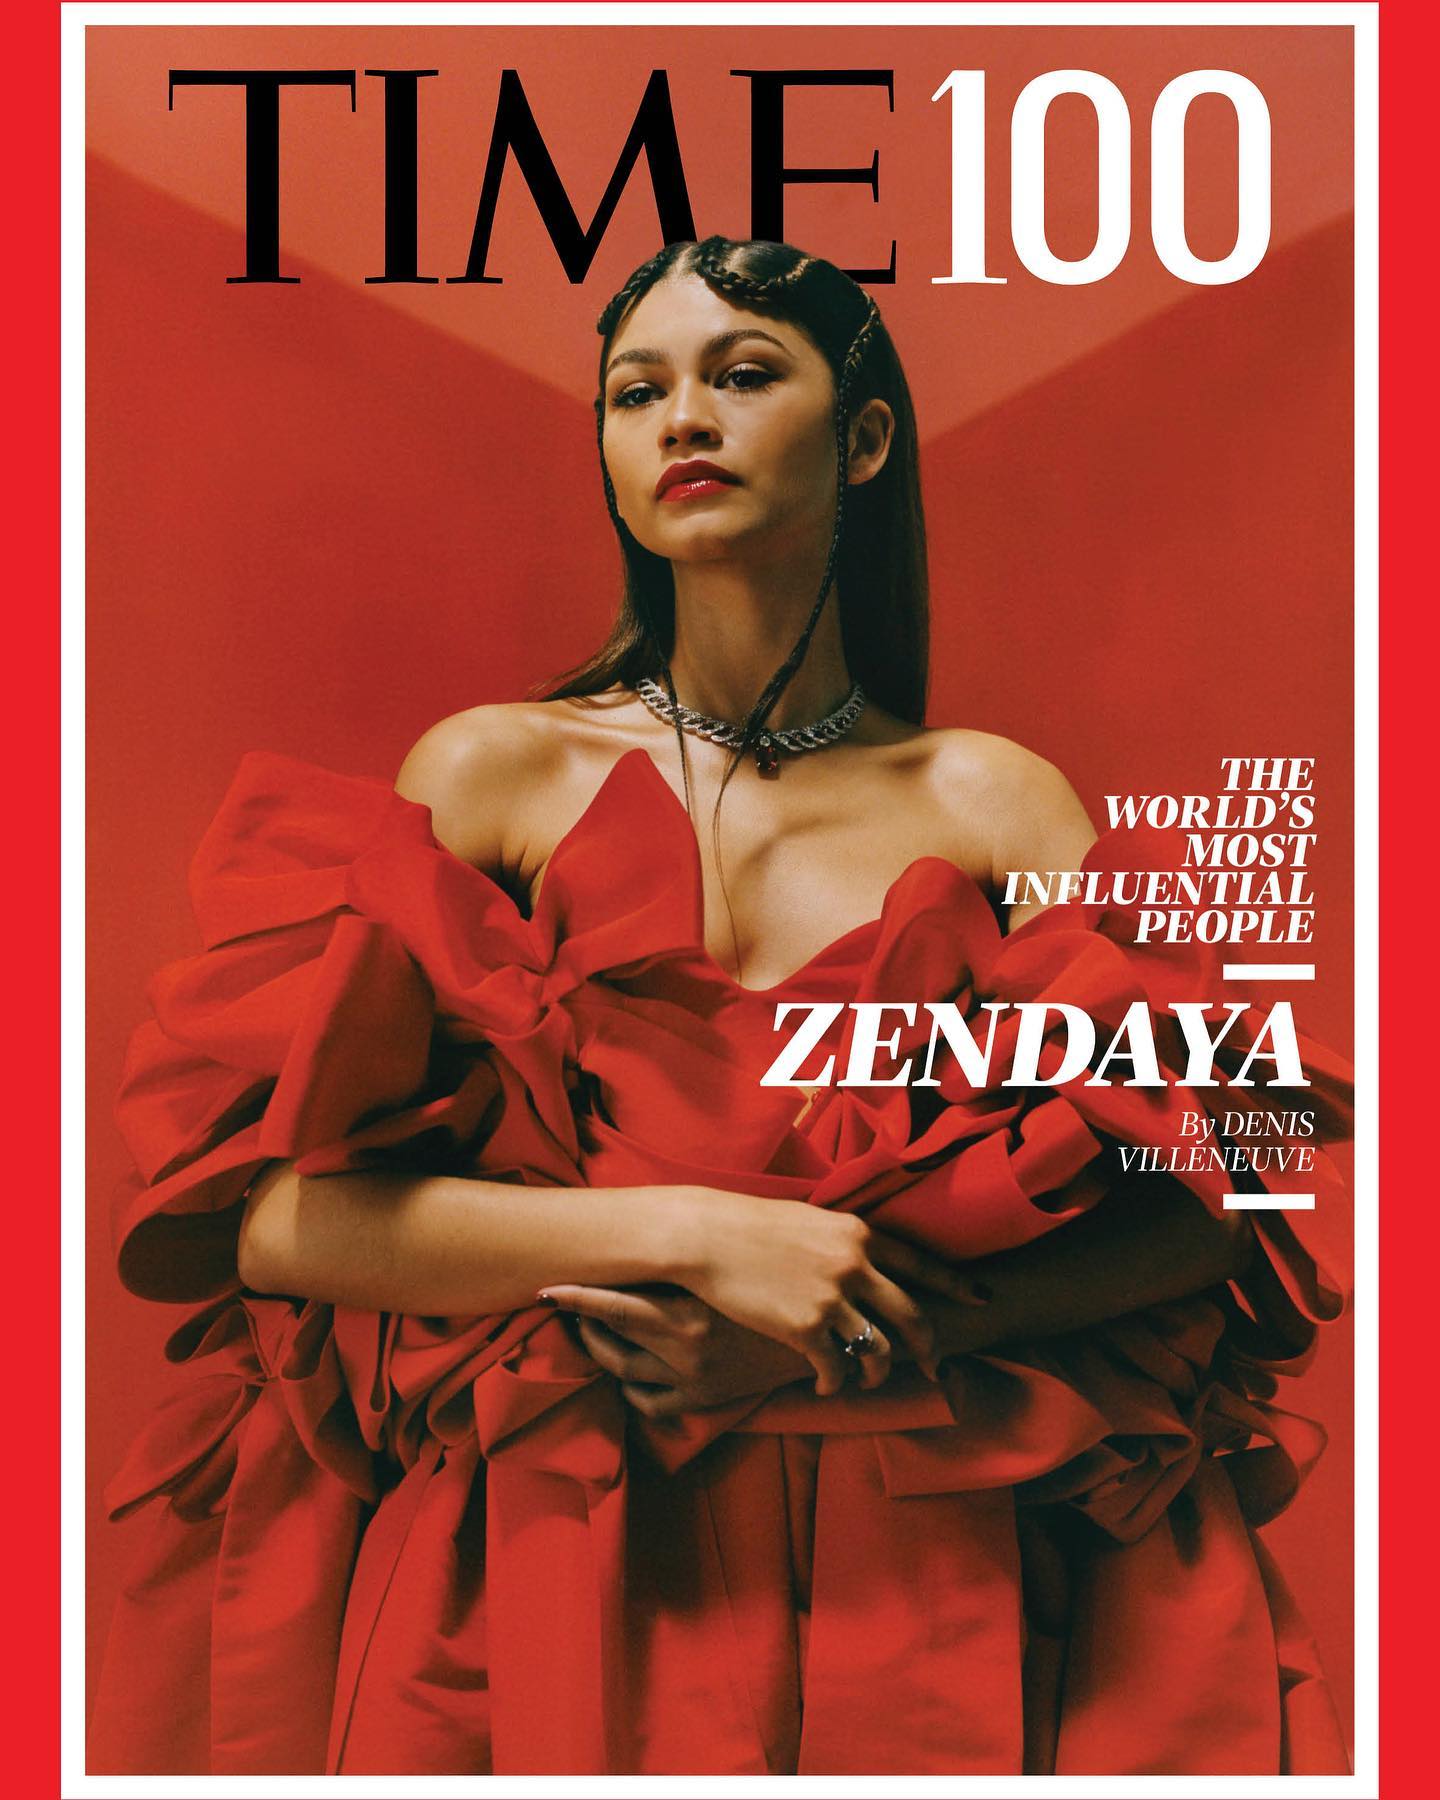 Zendaya in Cover Photoshoot for TIME 100 Magazine, May 2022